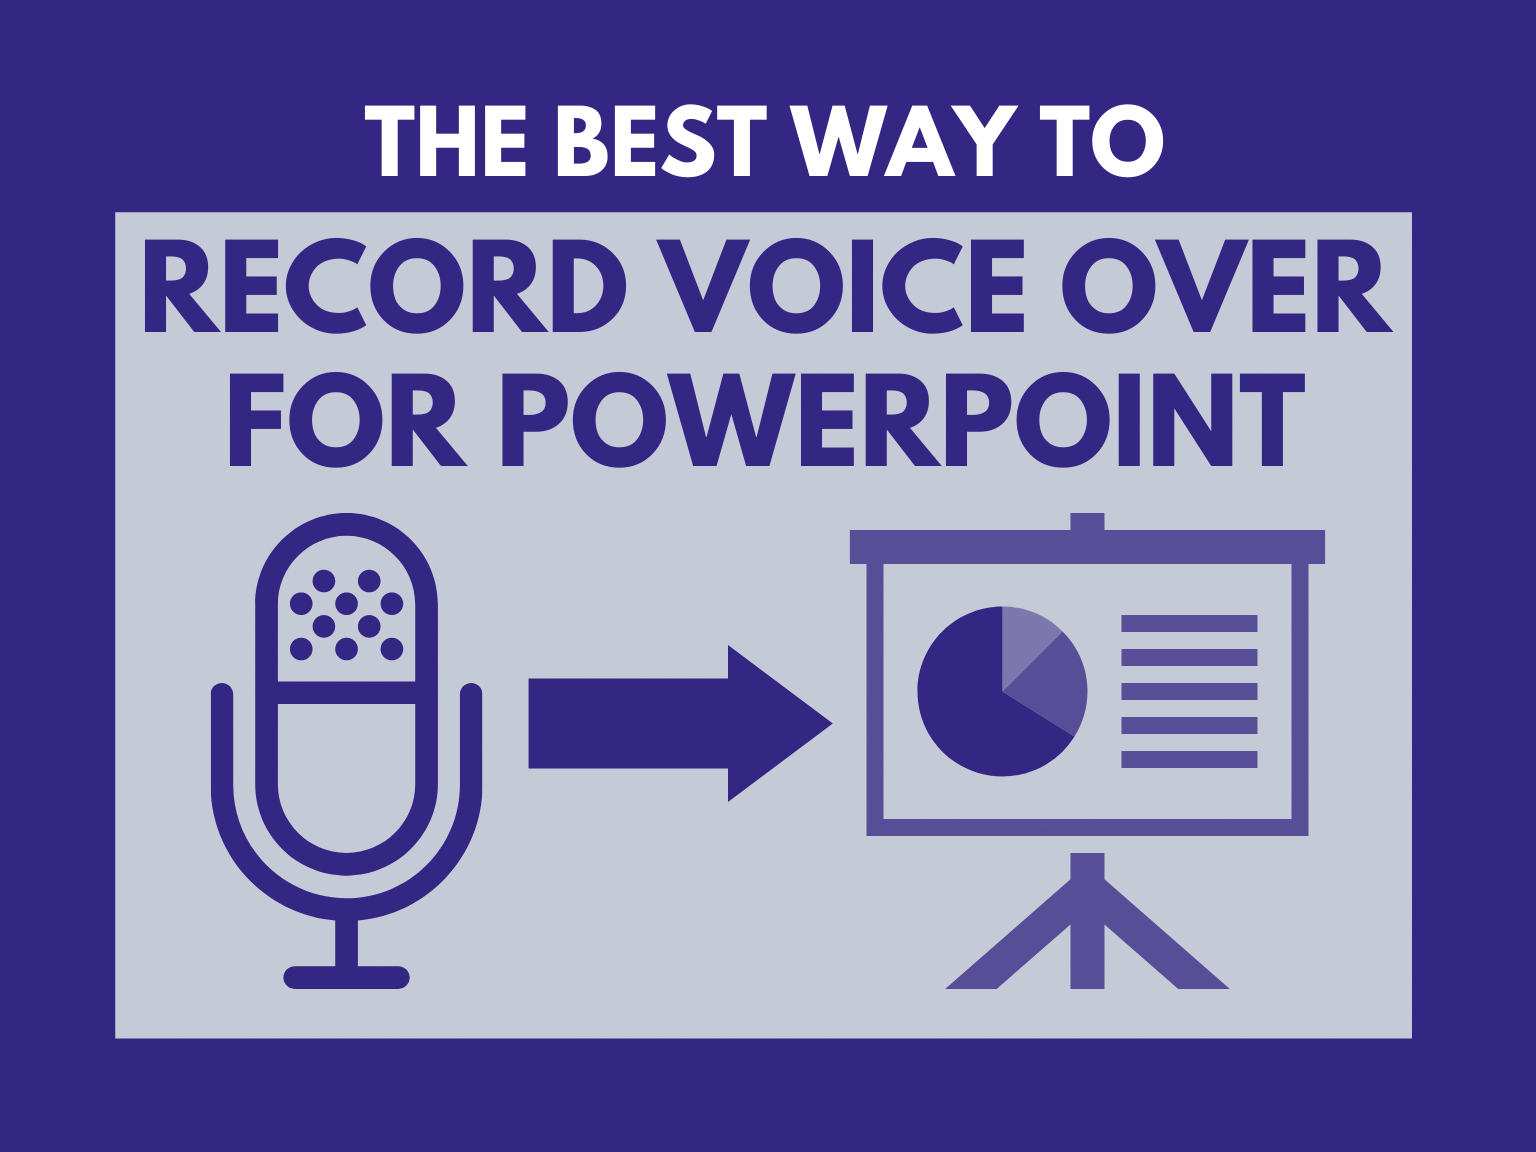 The Best Way to Record Voice Over for PowerPoint